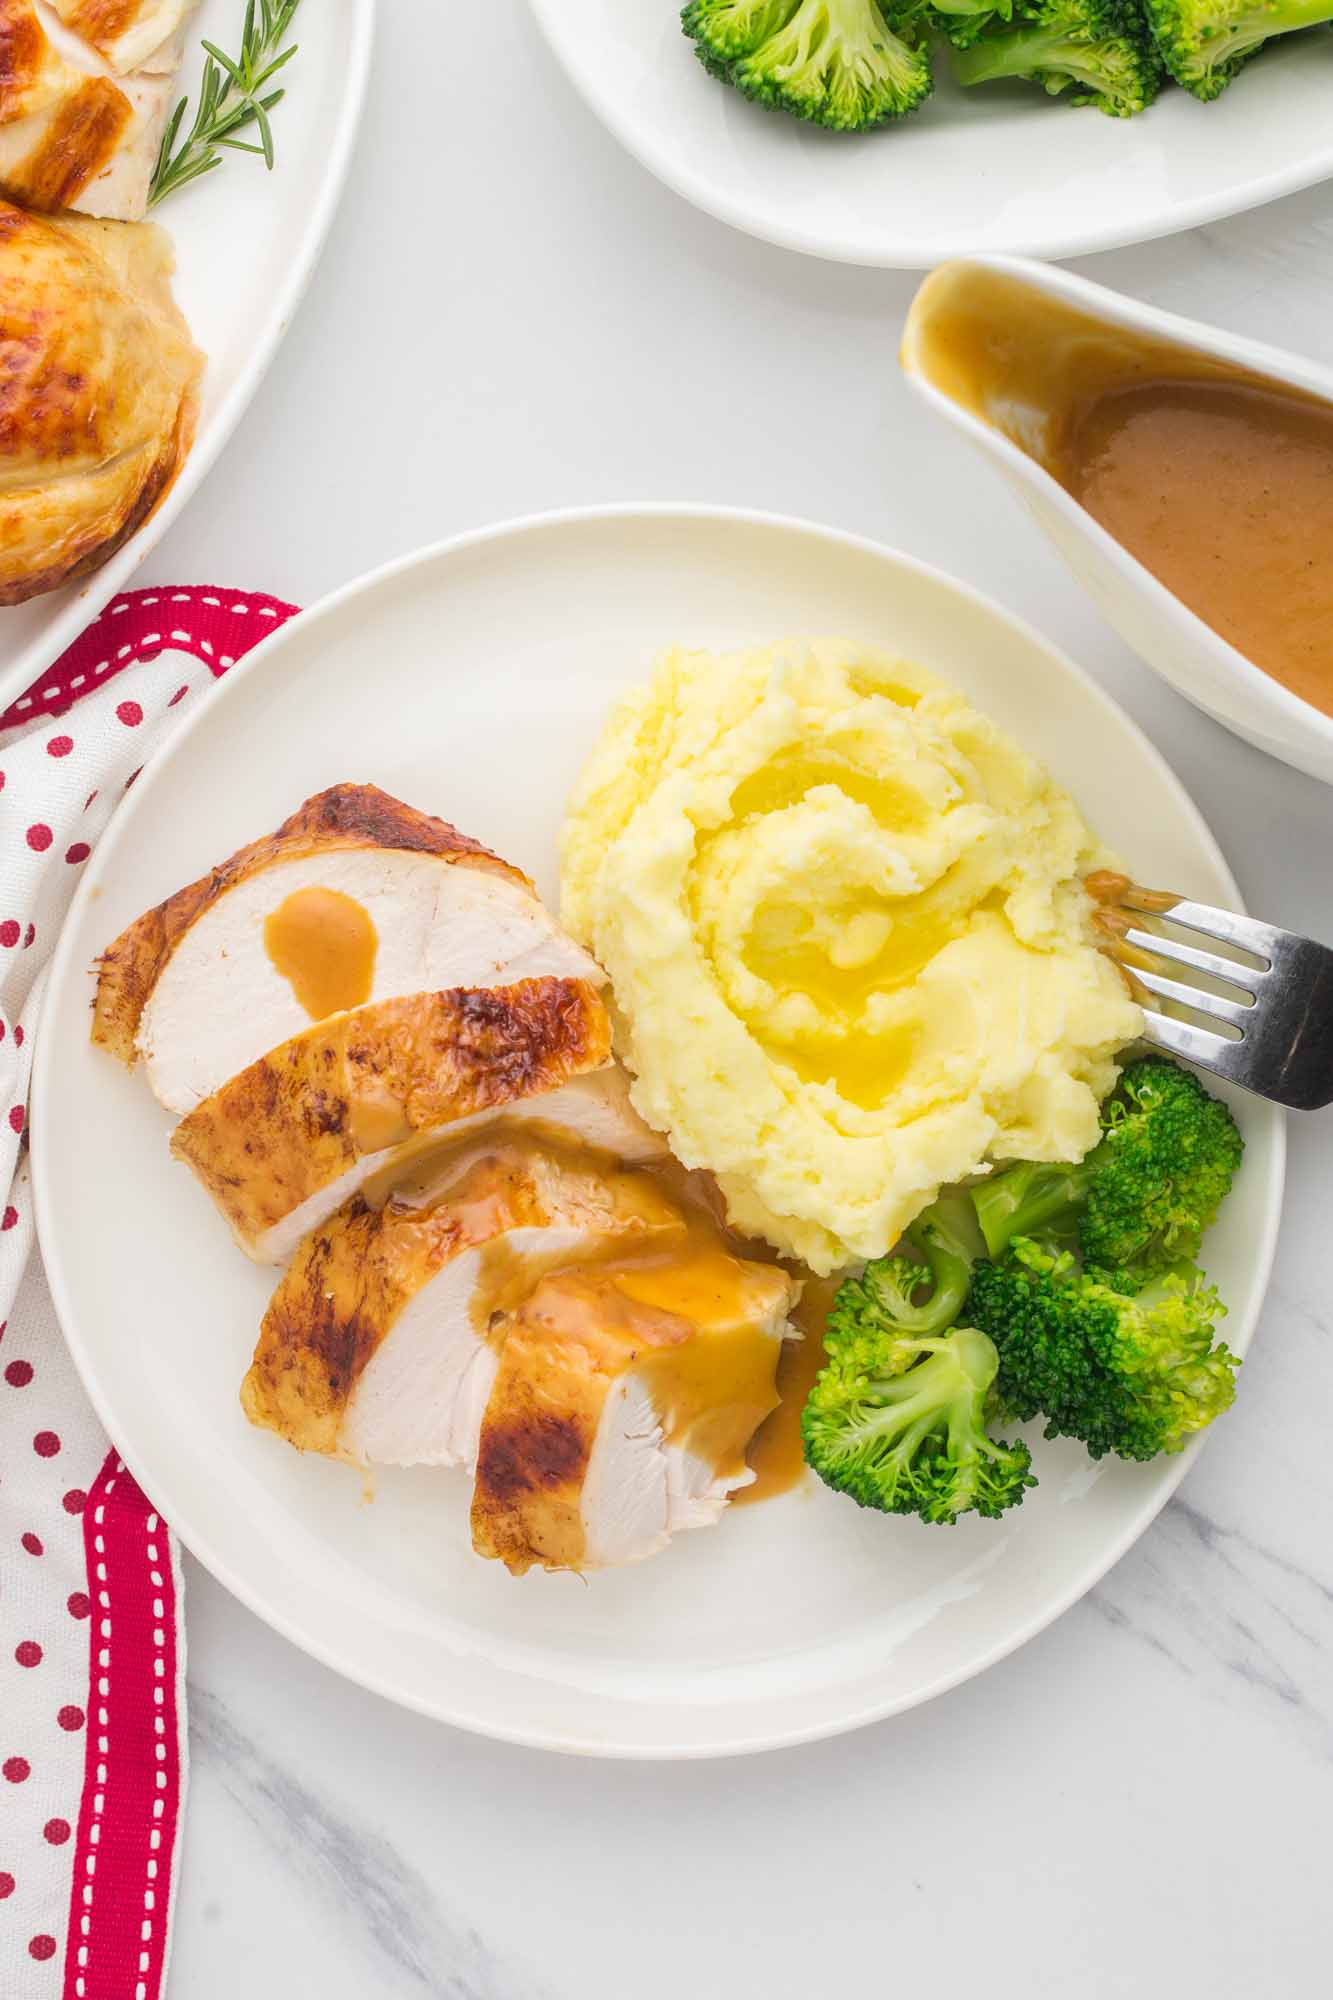 OVerhead shot of a plated chicken slices with mashed potatoes and broccoli